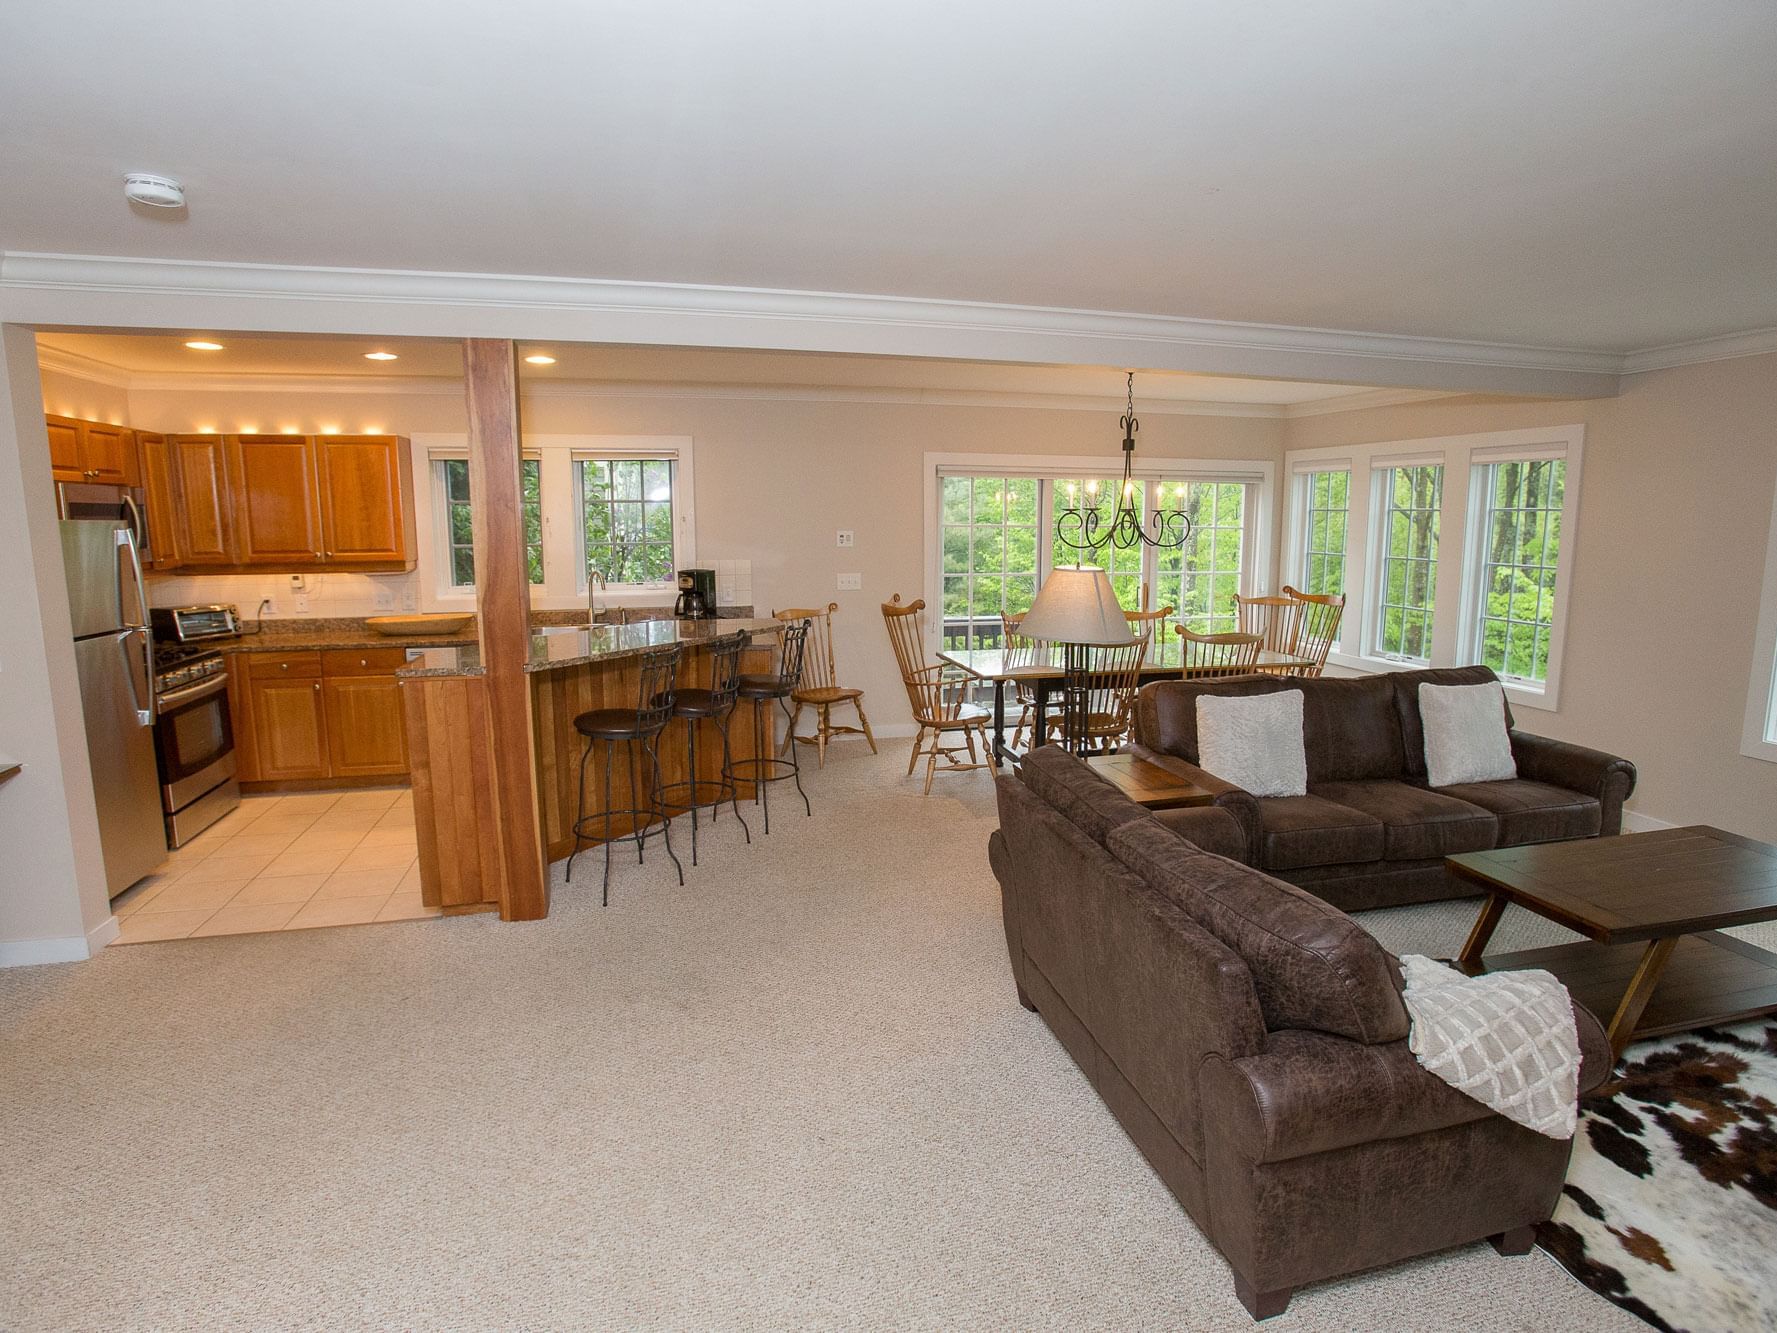 Living area, dining area and pantry area in the Resort Home 571A at Topnotch Stowe Resort